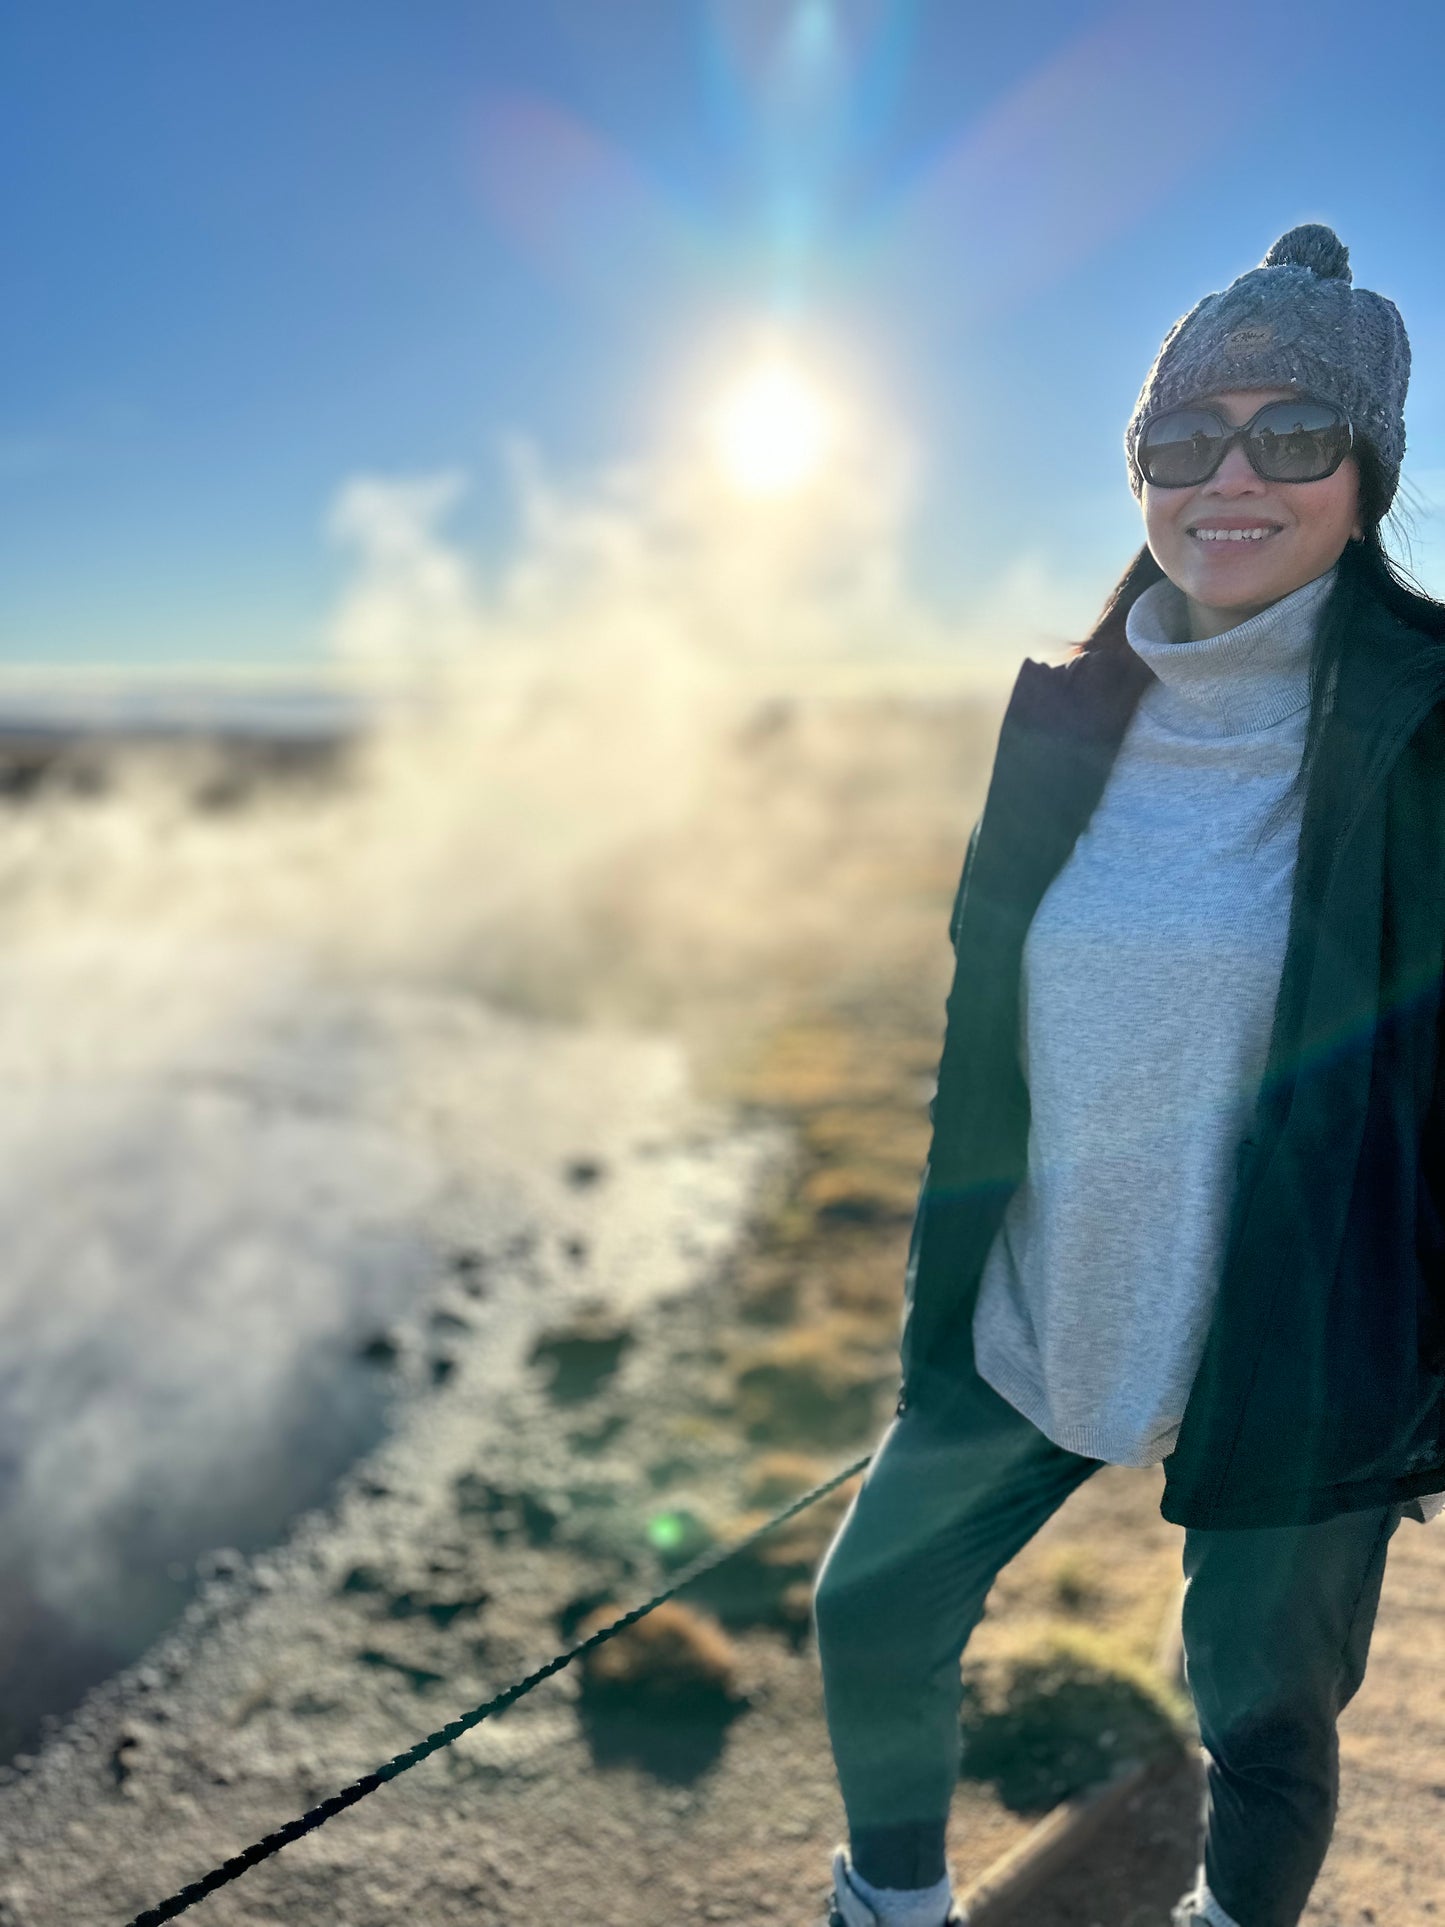 Iceland Highlights With Northern Lights Tour